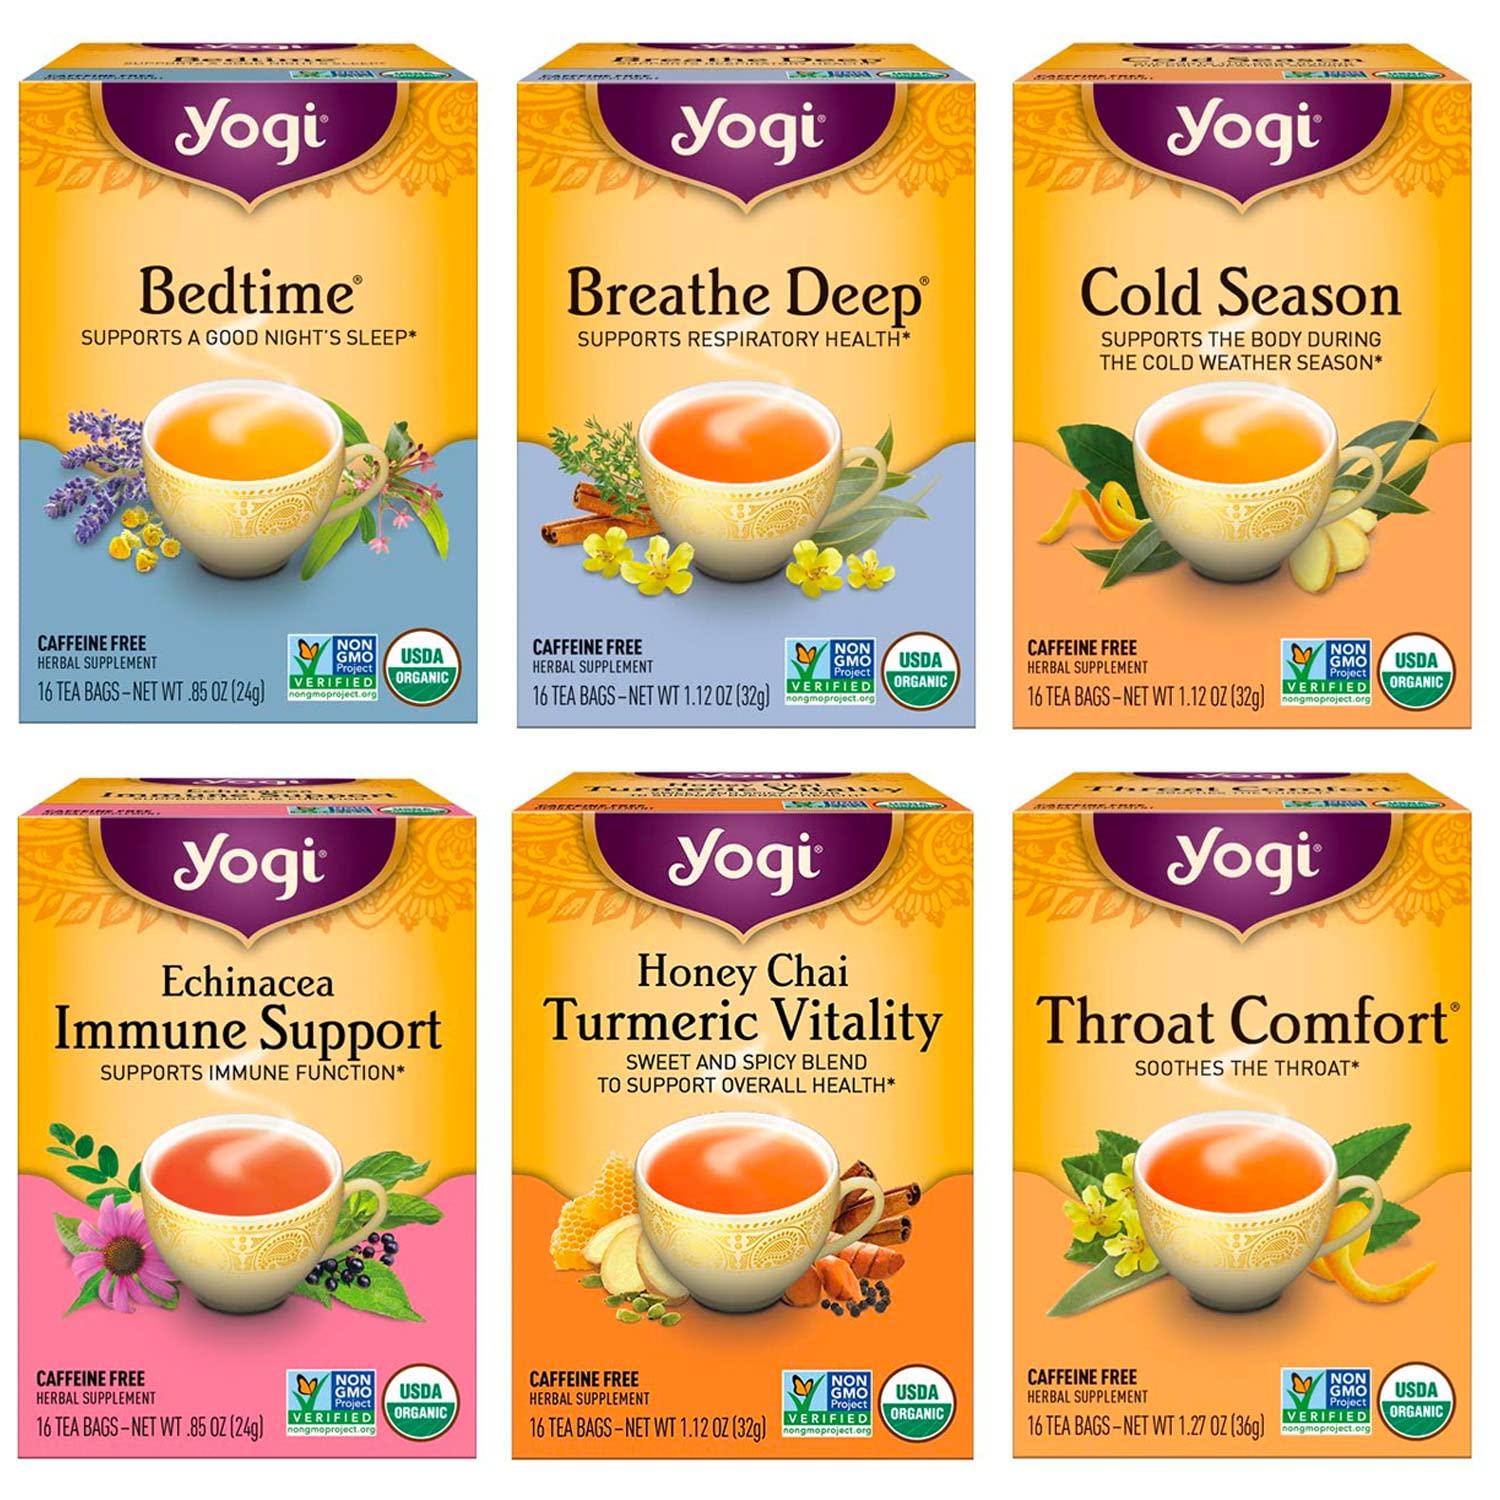 Yogi Tea Get Well Variety Pack - 16 Tea Bags per Pack (6 Packs) - Tea Variety Pack for Support During the Cold Season - Includes Cold Season, Bedtime, Breathe Deep, Echinacea Immune Support & More